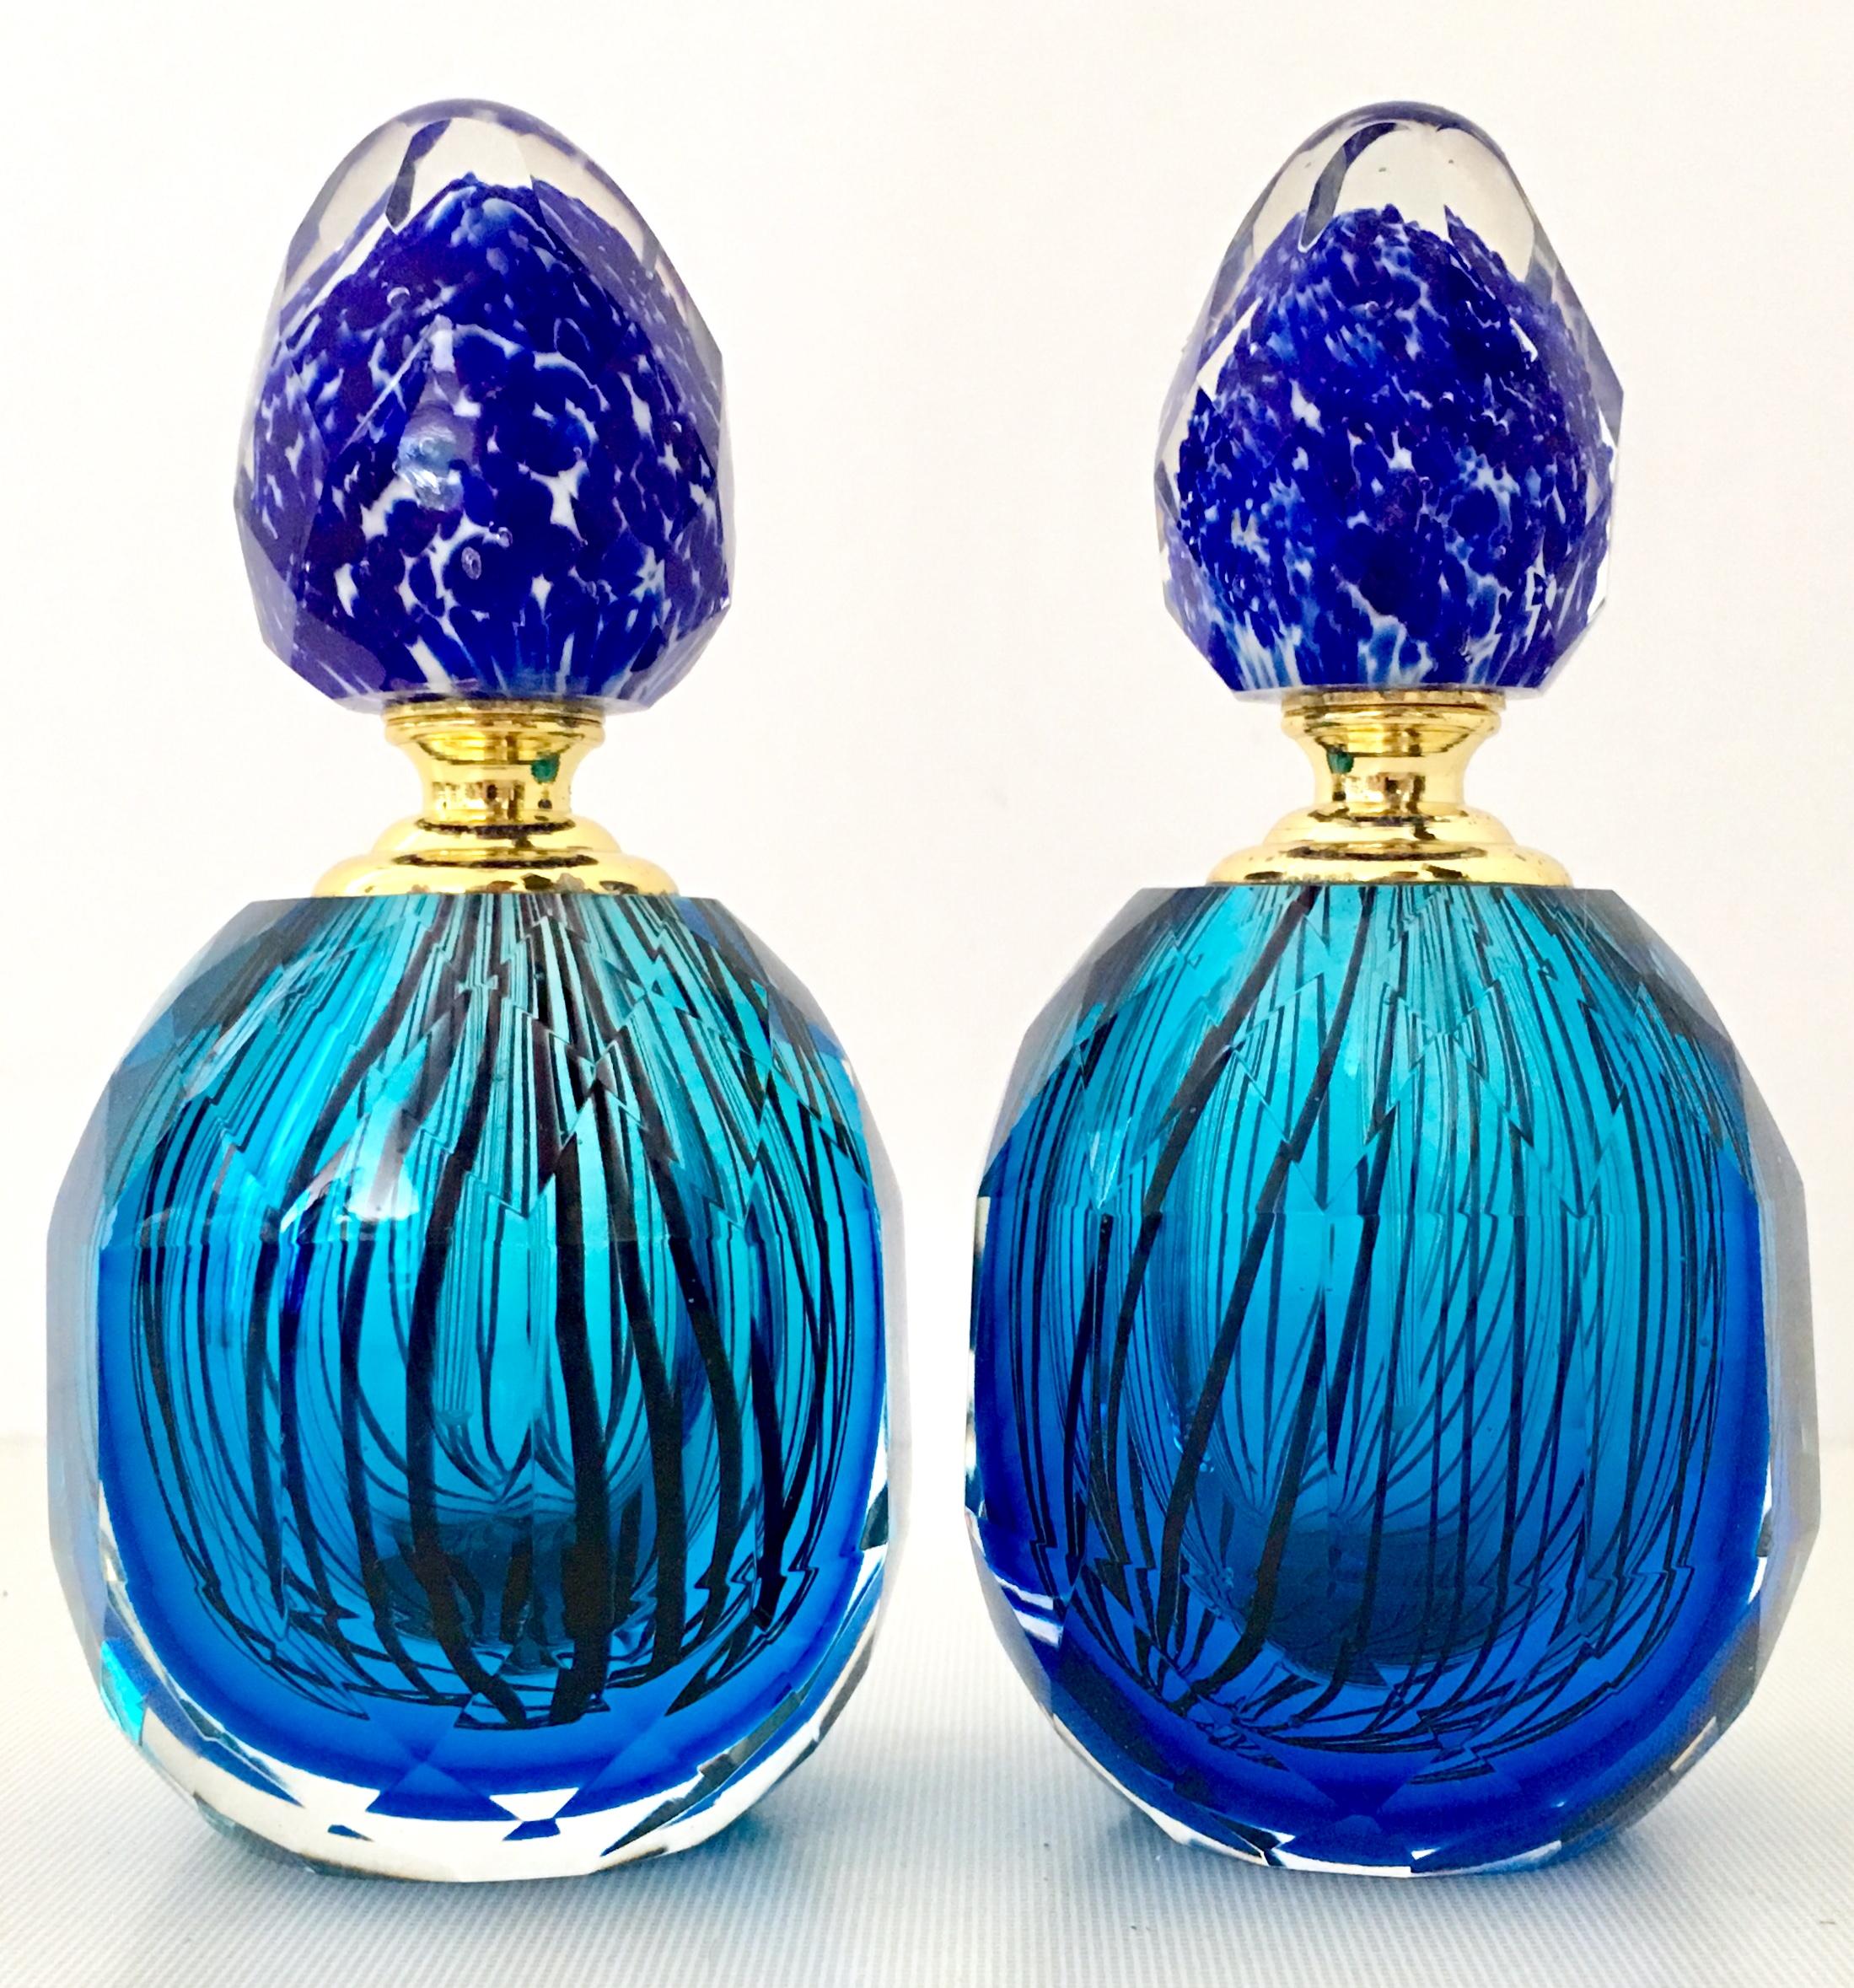 20th century Italian Murano glass style pair of perfume decanters. These brilliant cut and faceted blown glass decanters feature a vivid blue with cased black stripe body, and a speckled cased glass blue and white stopper. The gilt gold brass neck